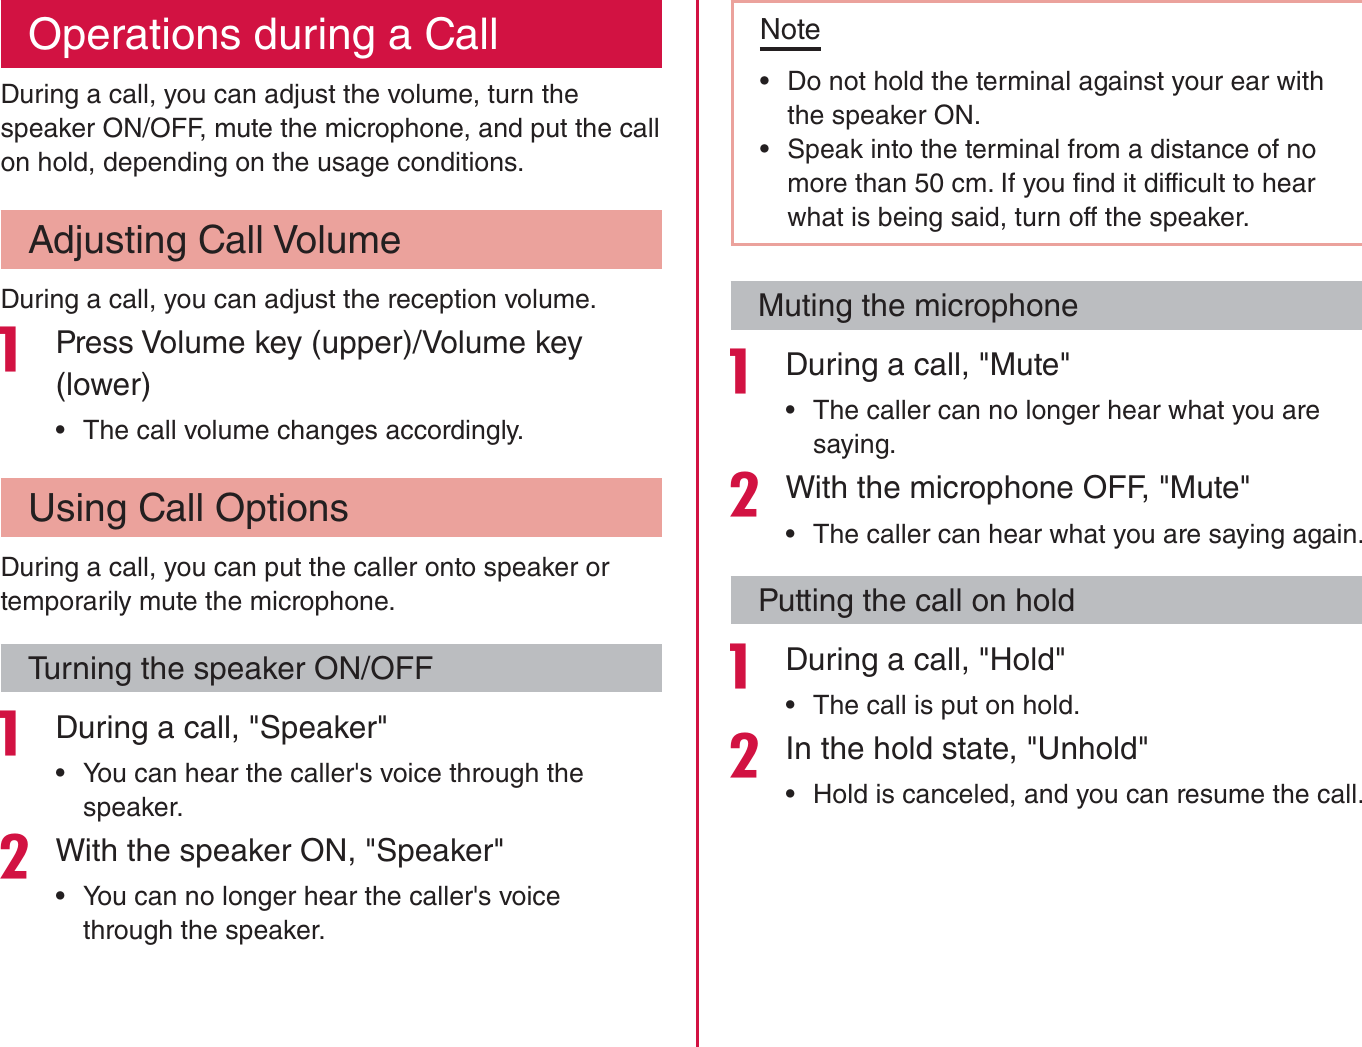 Operations during a CallDuring a call, you can adjust the volume, turn the speaker ON/OFF, mute the microphone, and put the call on hold, depending on the usage conditions.Adjusting Call VolumeDuring a call, you can adjust the reception volume. Press Volume key (upper)/Volume key (lower) rThe call volume changes accordingly.Using Call OptionsDuring a call, you can put the caller onto speaker or temporarily mute the microphone.Turning the speaker ON/OFF During a call, &quot;Speaker&quot; rYou can hear the caller&apos;s voice through the speaker.With the speaker ON, &quot;Speaker&quot; rYou can no longer hear the caller&apos;s voice through the speaker.Note rDo not hold the terminal against your ear with the speaker ON. rSpeak into the terminal from a distance of no more than 50 cm. If you find it difficult to hear what is being said, turn off the speaker.Muting the microphone During a call, &quot;Mute&quot; rThe caller can no longer hear what you are saying.With the microphone OFF, &quot;Mute&quot; rThe caller can hear what you are saying again.Putting the call on hold During a call, &quot;Hold&quot; rThe call is put on hold.In the hold state, &quot;Unhold&quot; rHold is canceled, and you can resume the call.82Calling / Network Services